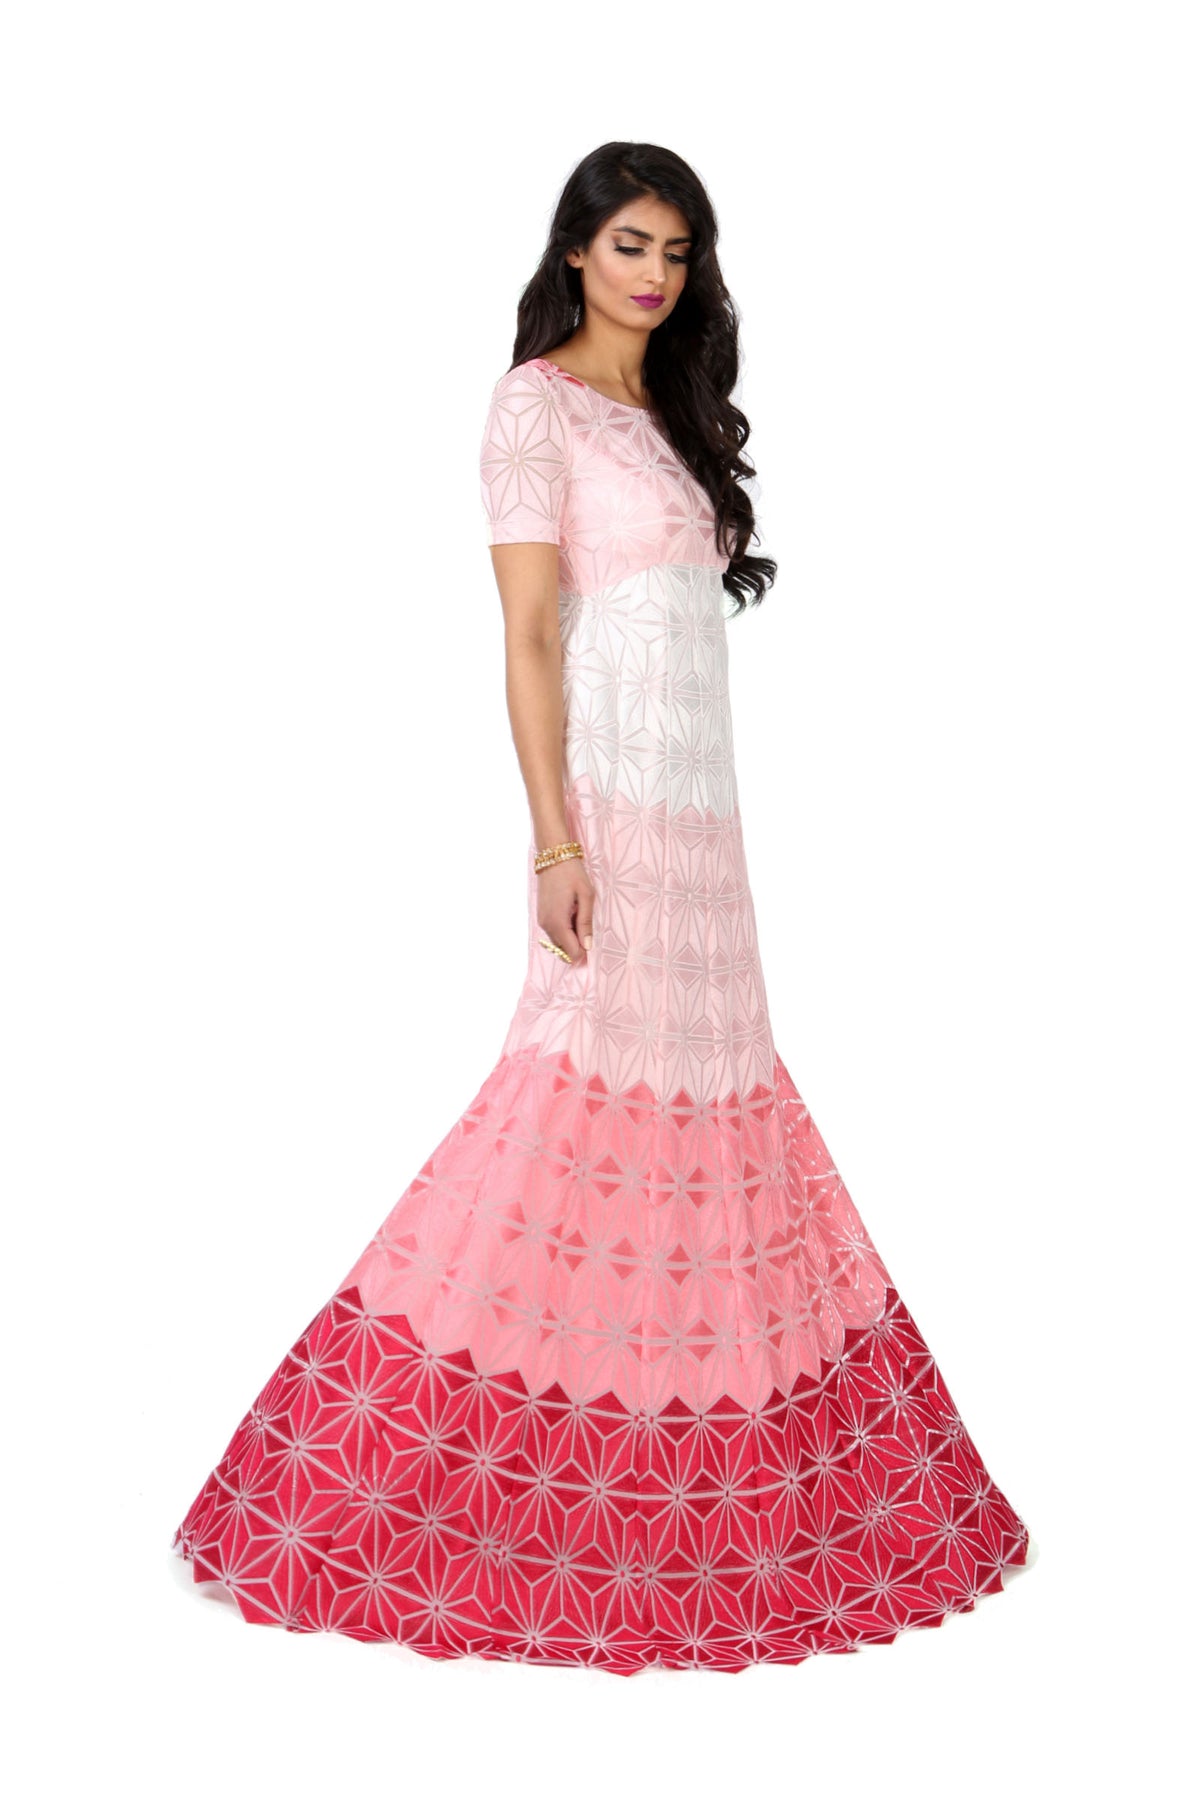 ANISA Ombre Embroidery Dress - Side View - Harleen Kaur Womenswear - Sample Sale